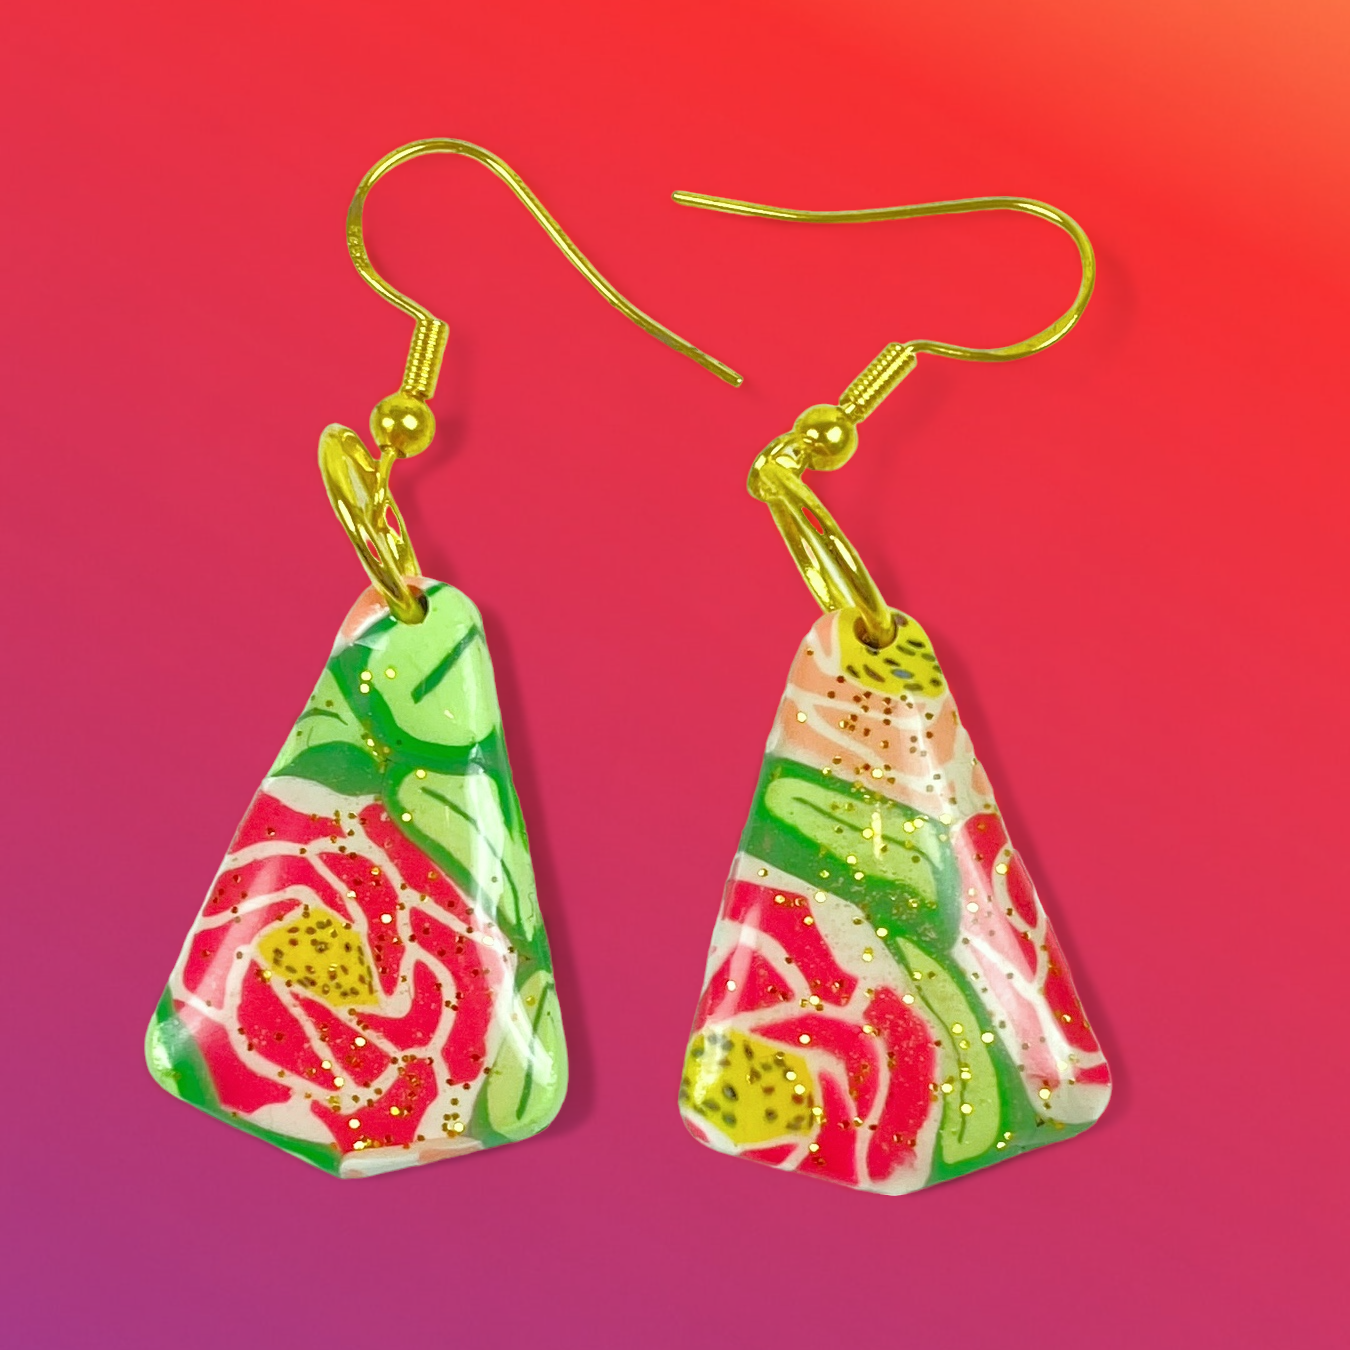 Whispering Roses Handmade Polymer Clay Dangle Earrings on a pink background